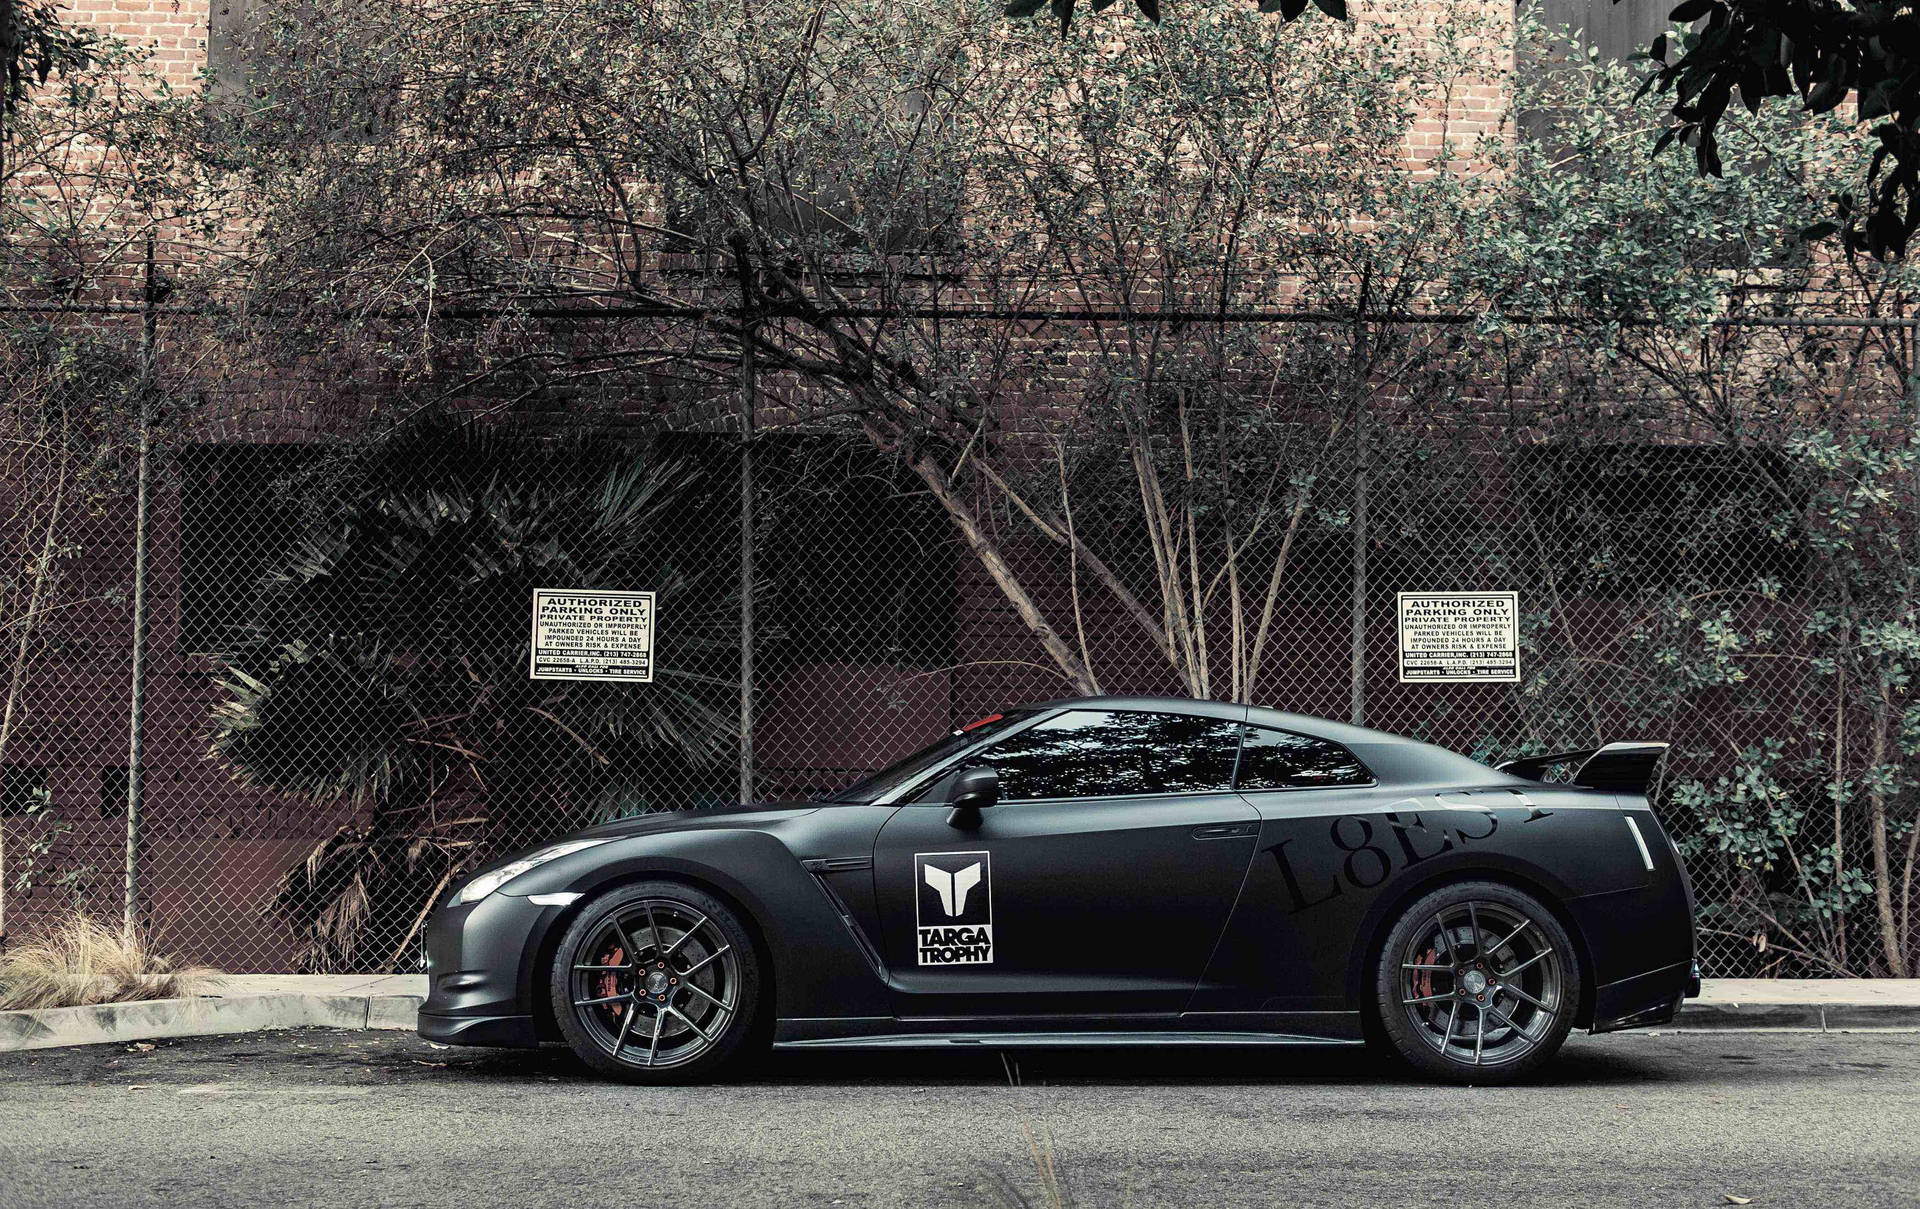 Caption: Powerful Nissan Skyline GTR R35 parked behind mesh fencing. Wallpaper